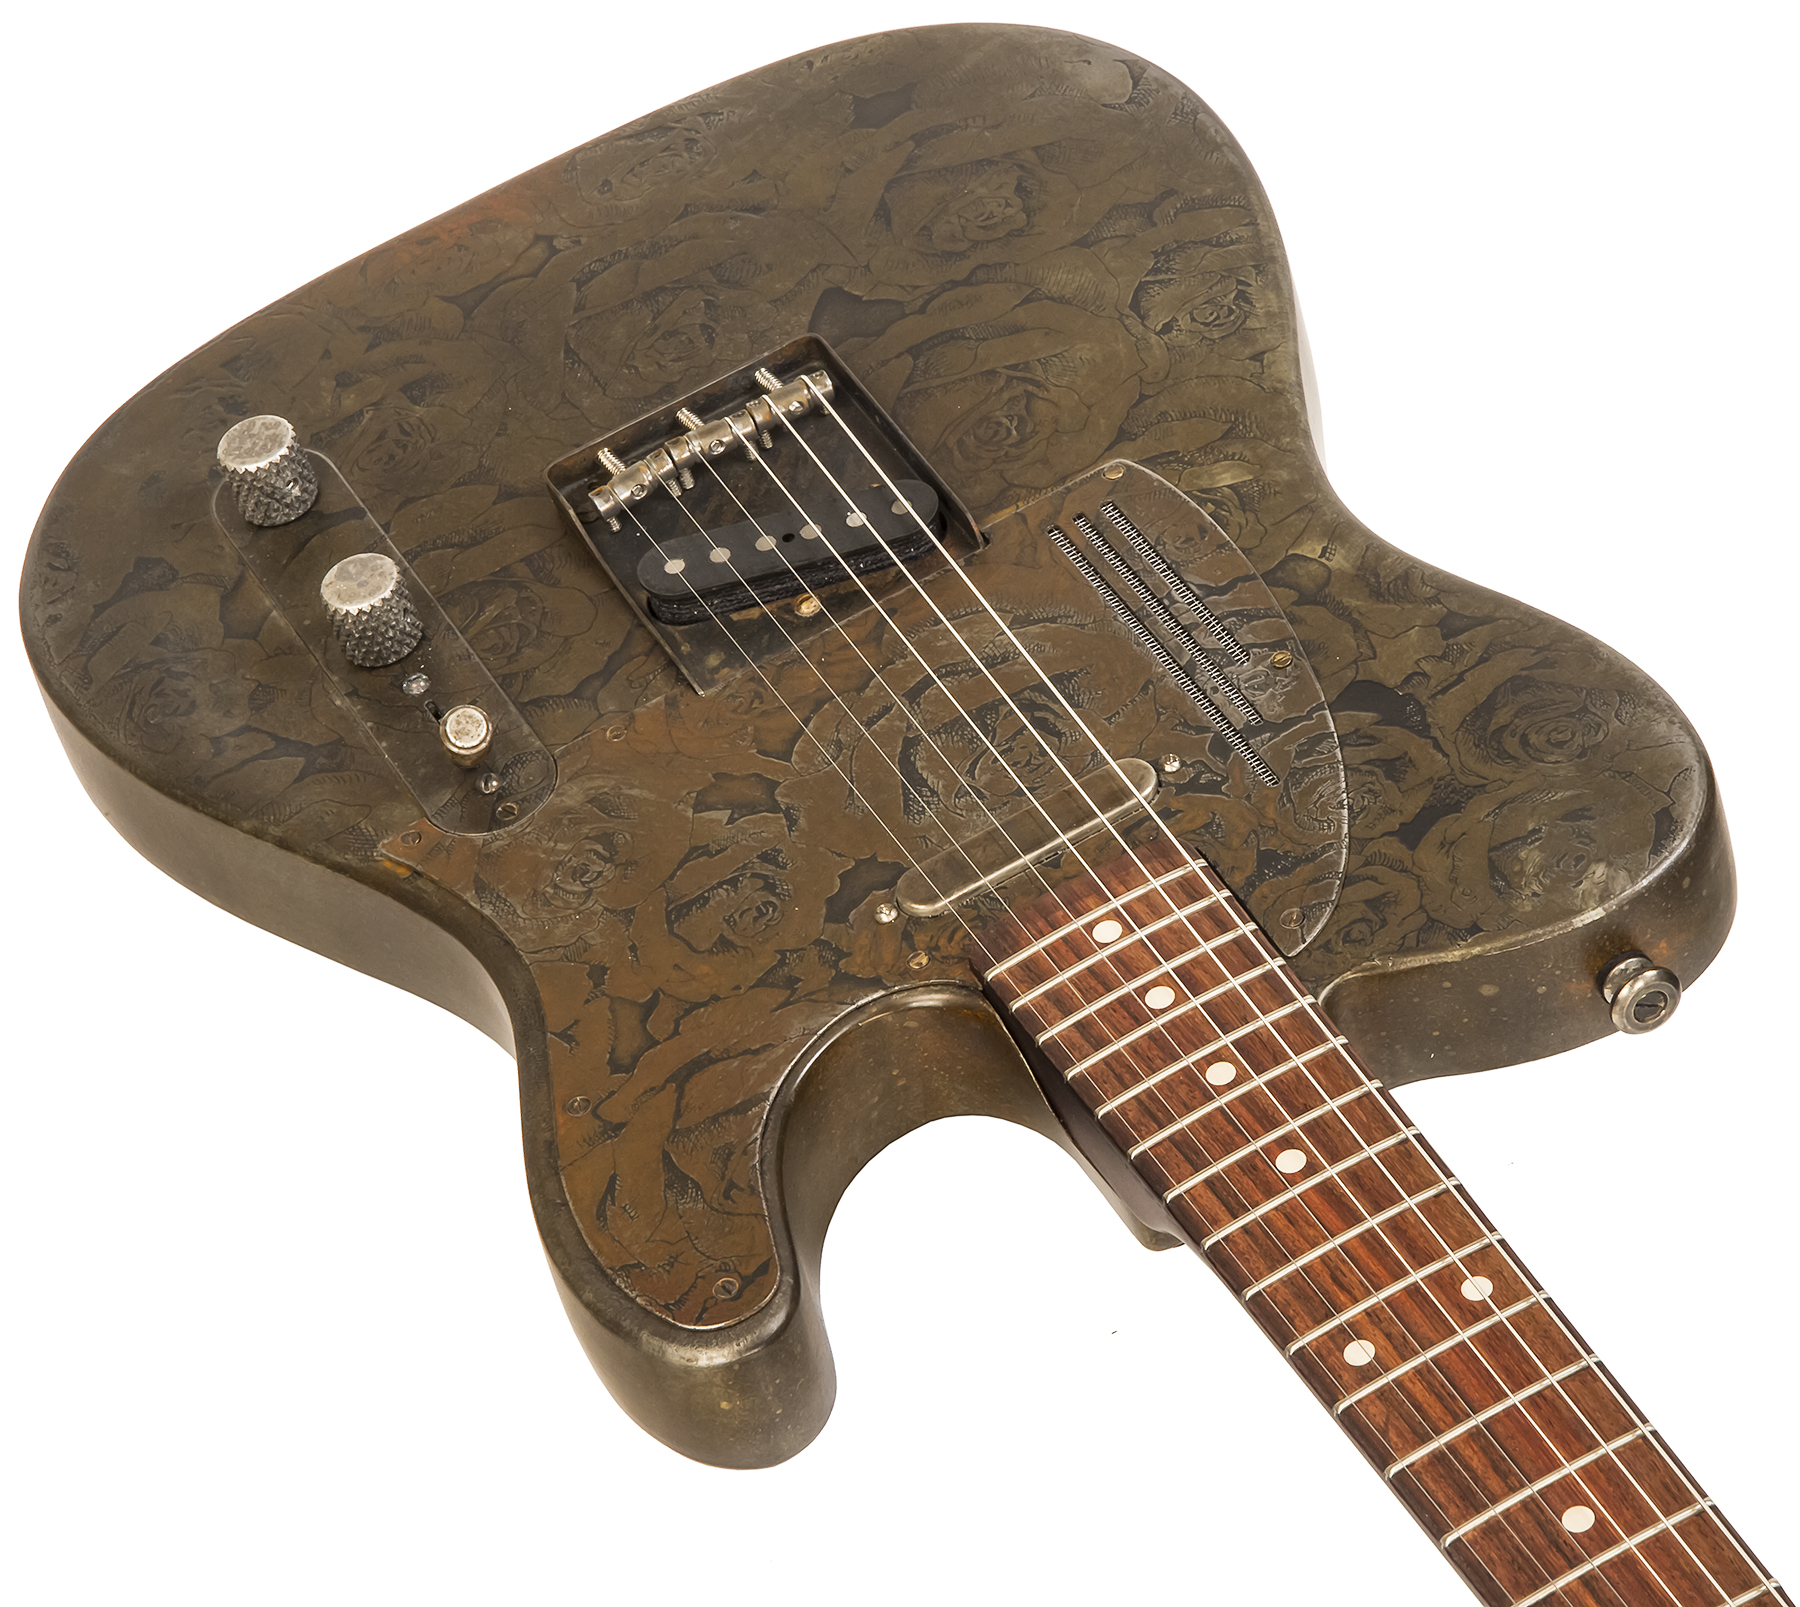 James Trussart Steelcaster Perf.back 2s Ht Rw #21000 - Rusty Roses - Guitare Électrique 1/2 Caisse - Variation 1